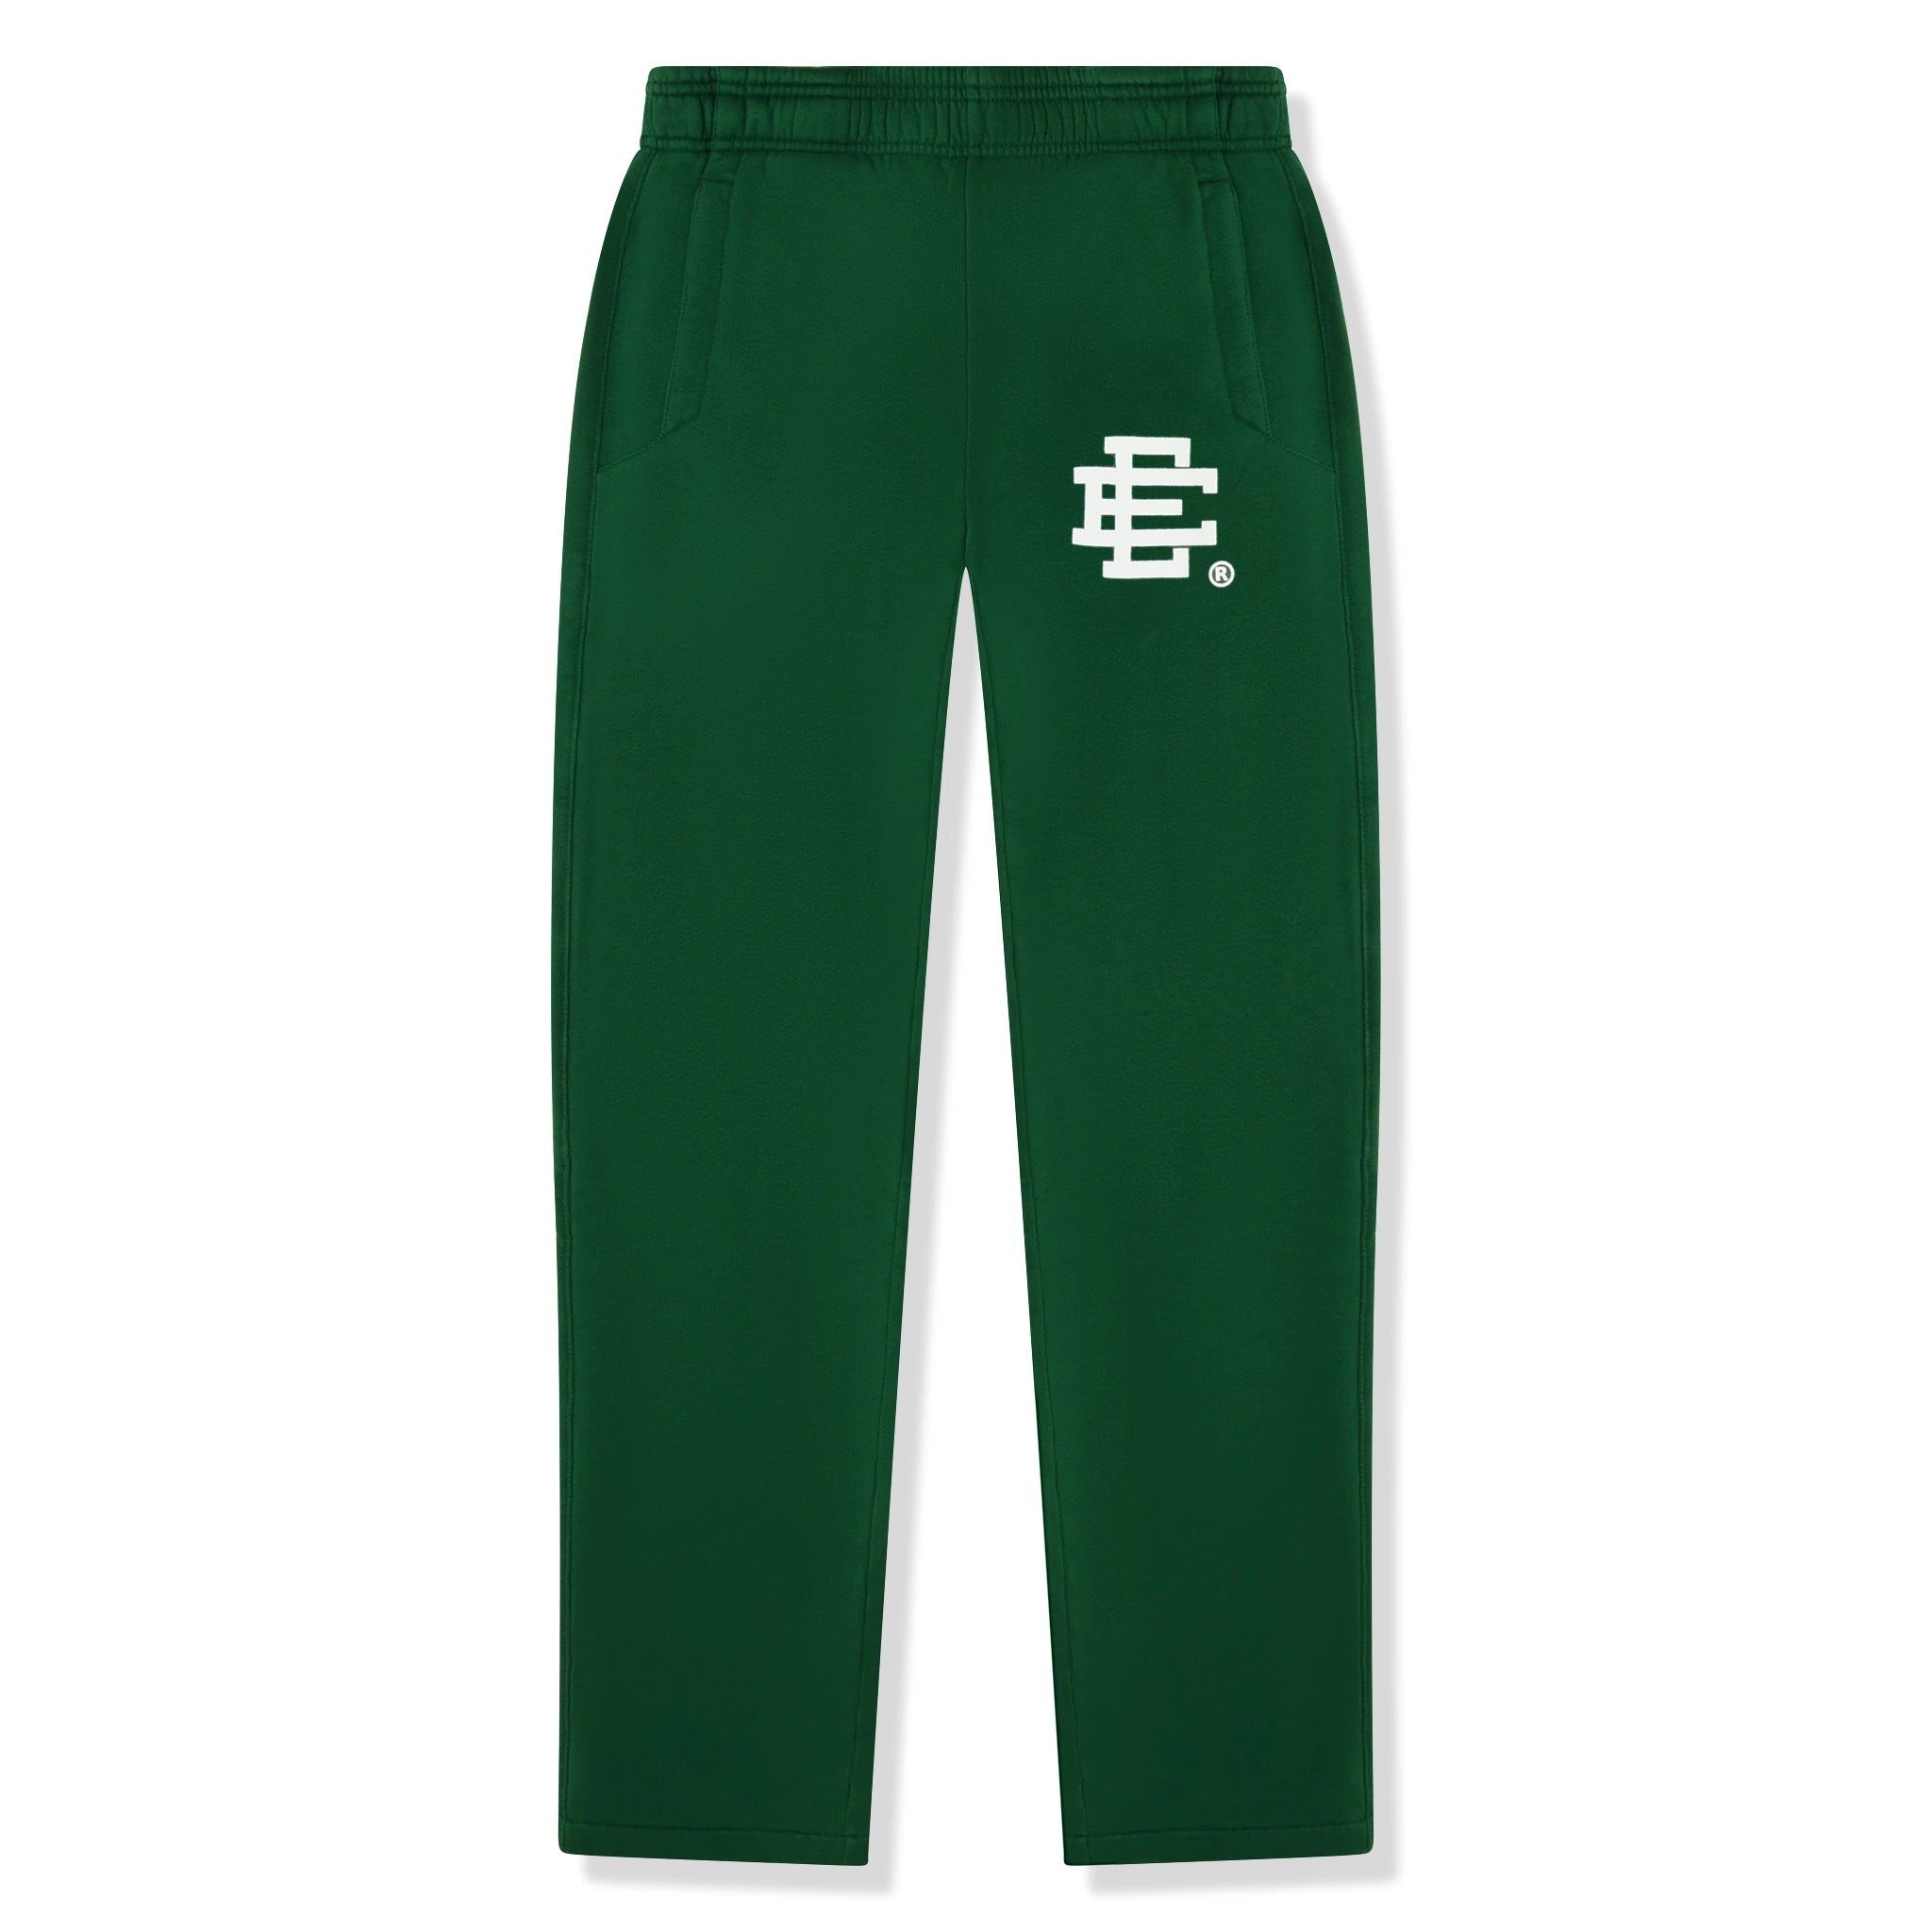 Front view of Eric Emanuel EE Basic Green White Sweatpants